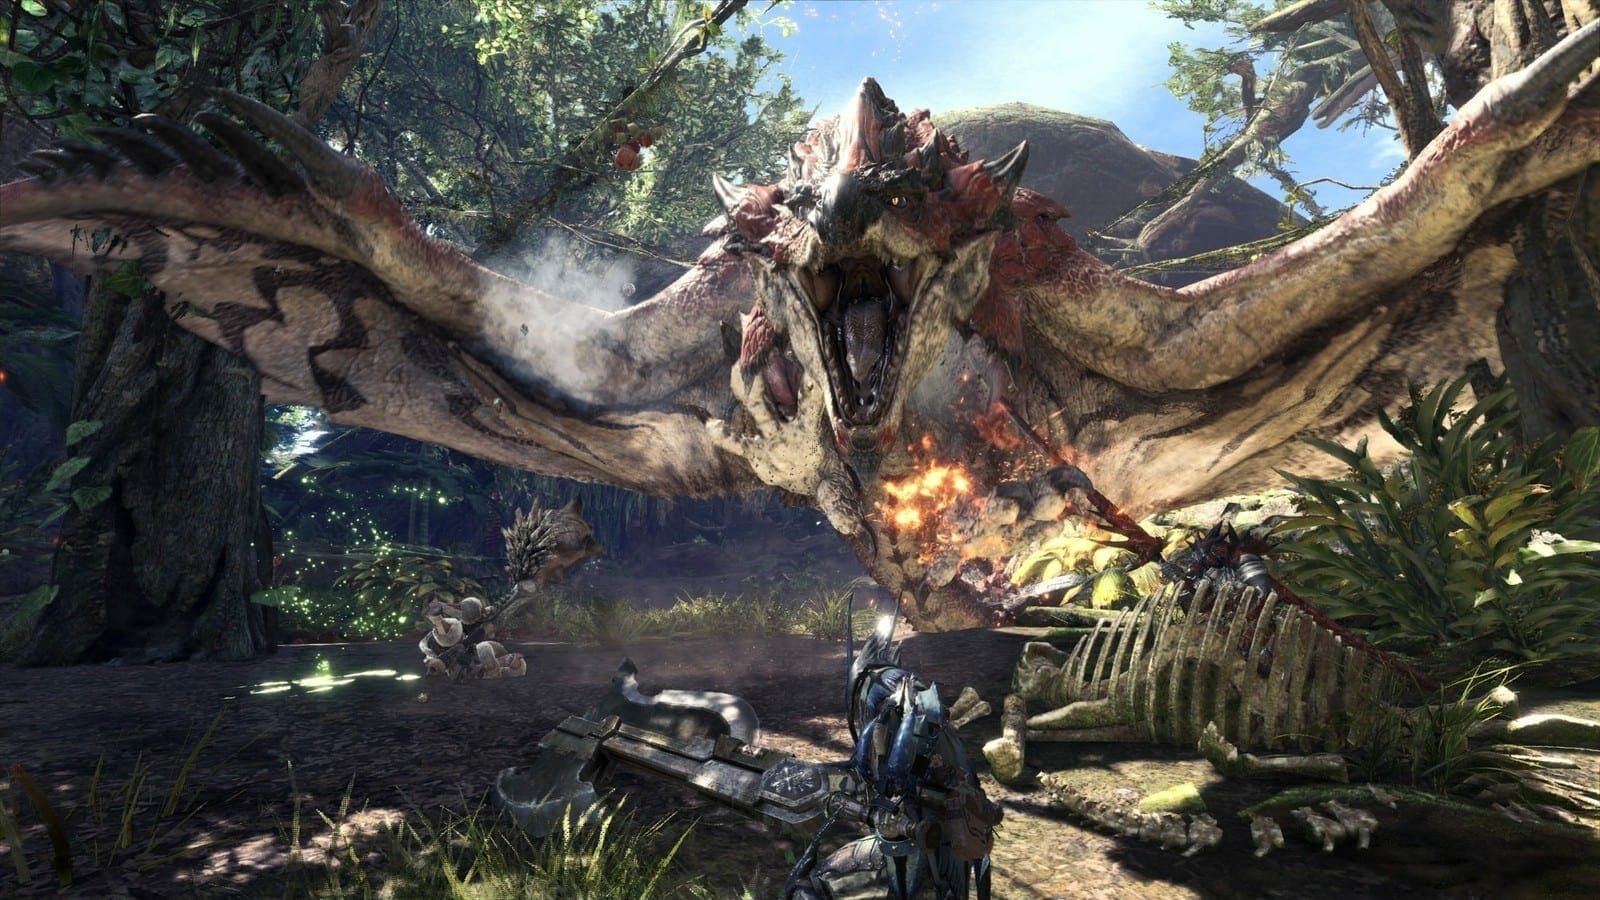 Monster Hunter World Pc Nvidia Gtx 1080 Unable To Run At 60 Fps On Highest Settings Thenerdmag